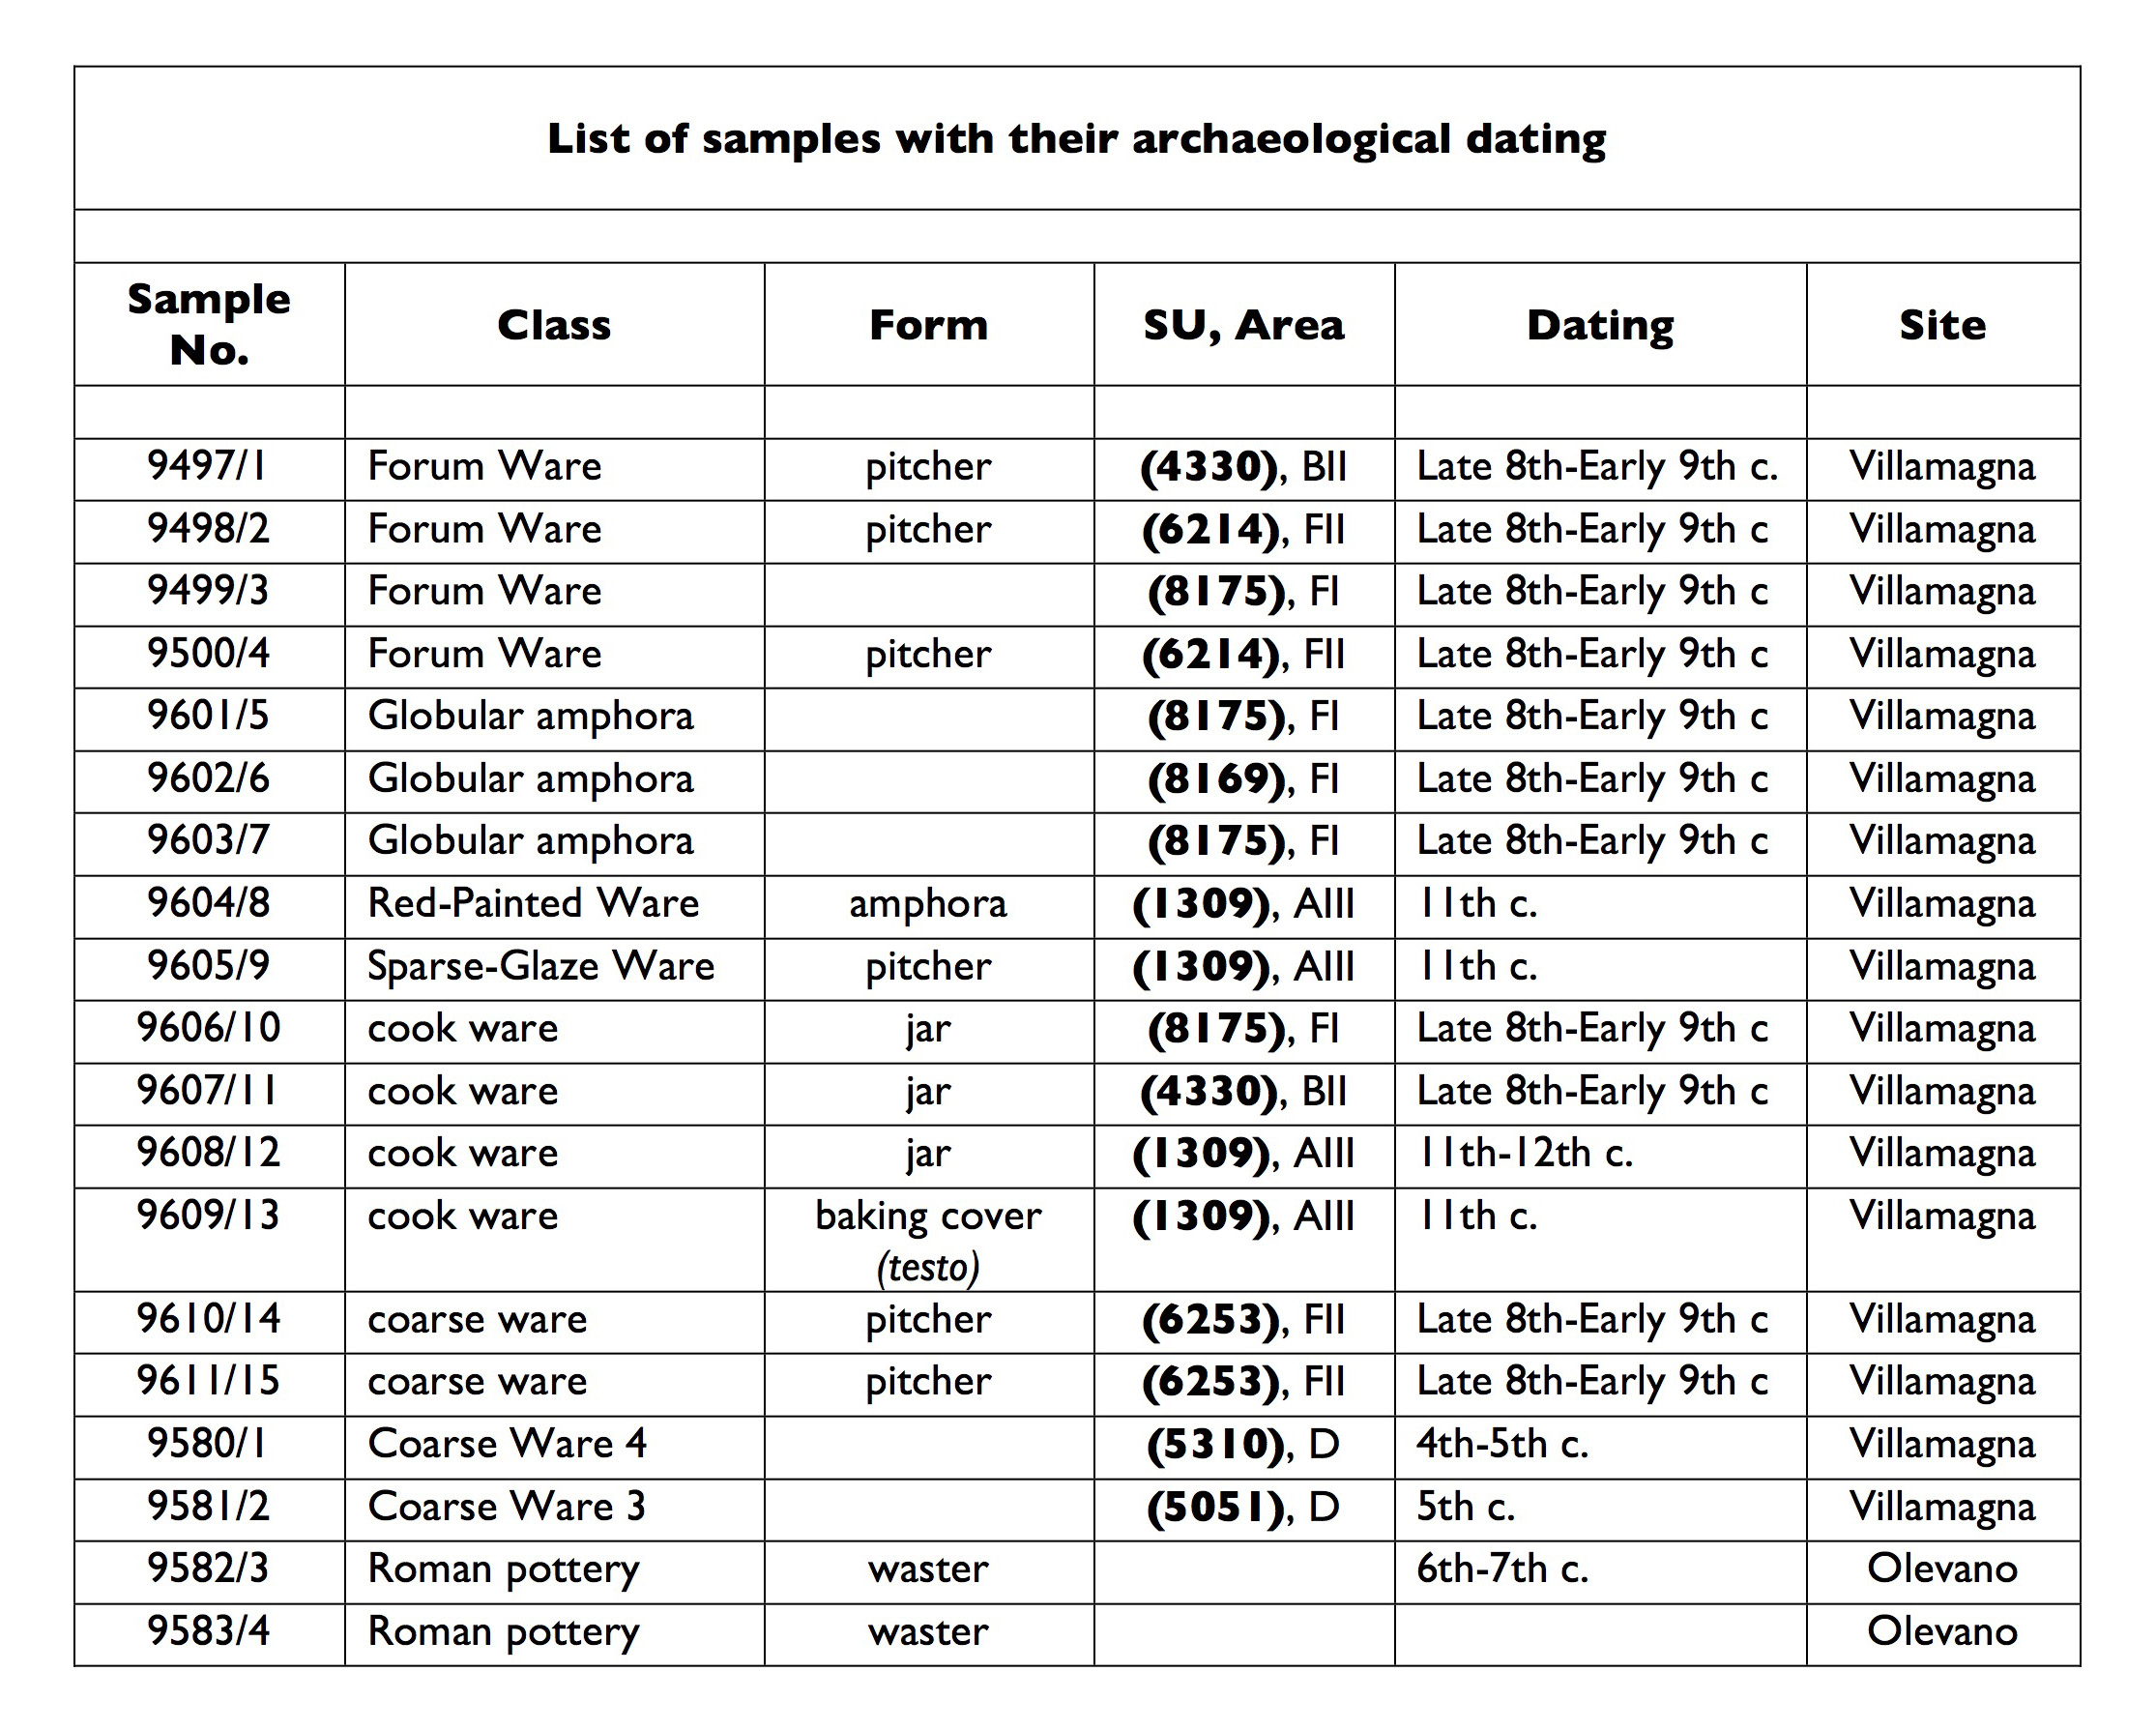 Table 1. List of samples with their archaeological dating.